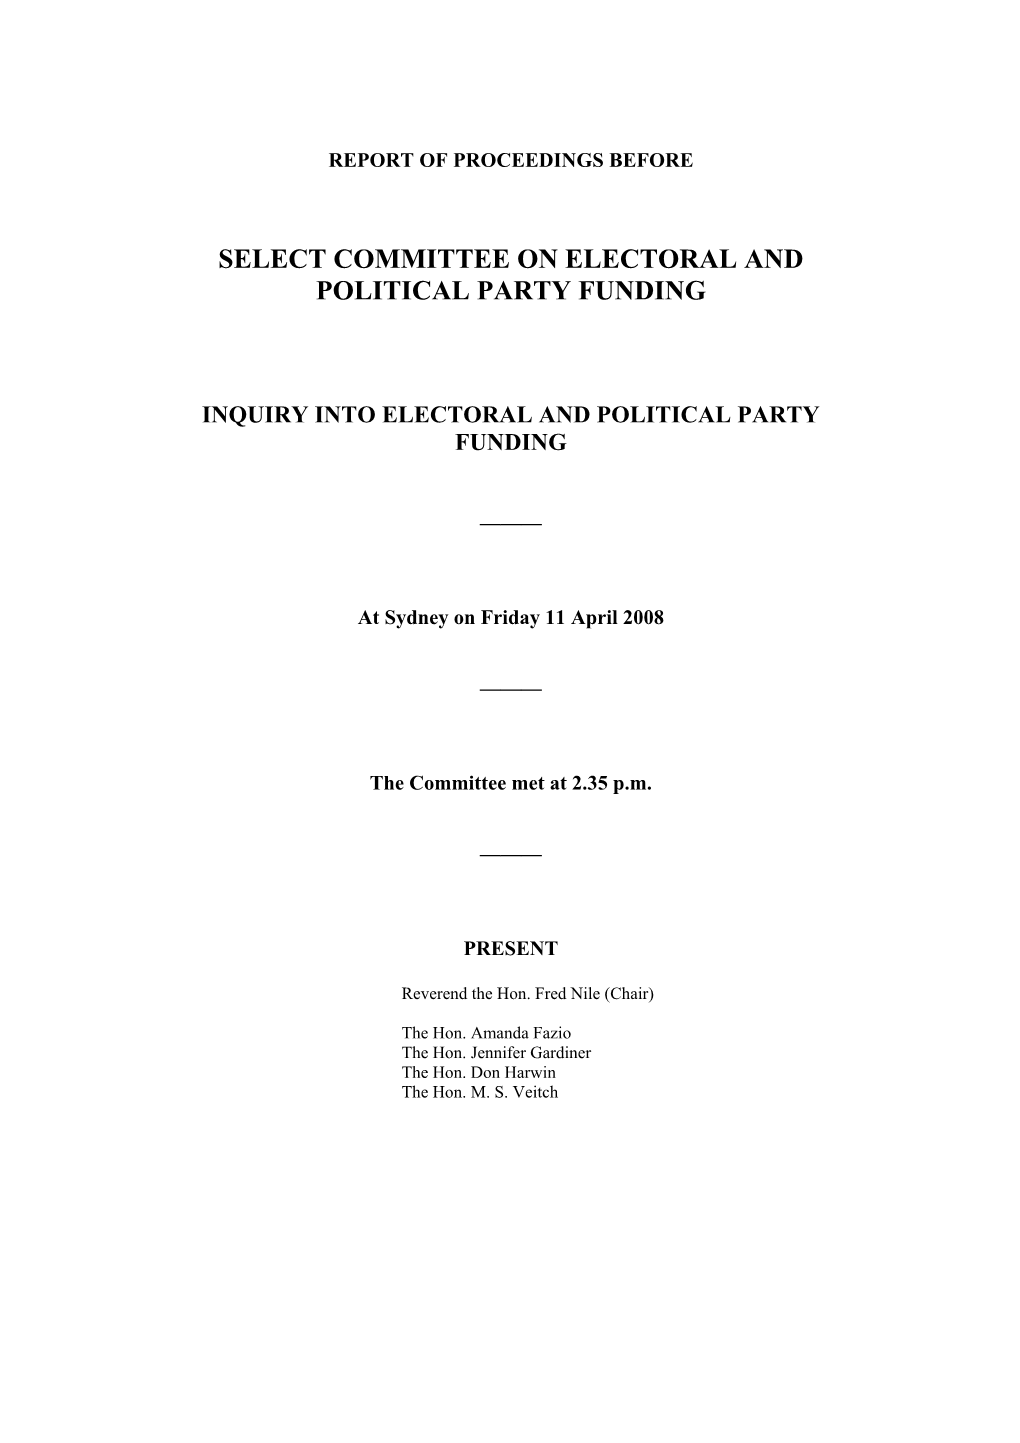 Select Committee on Electoral and Political Party Funding